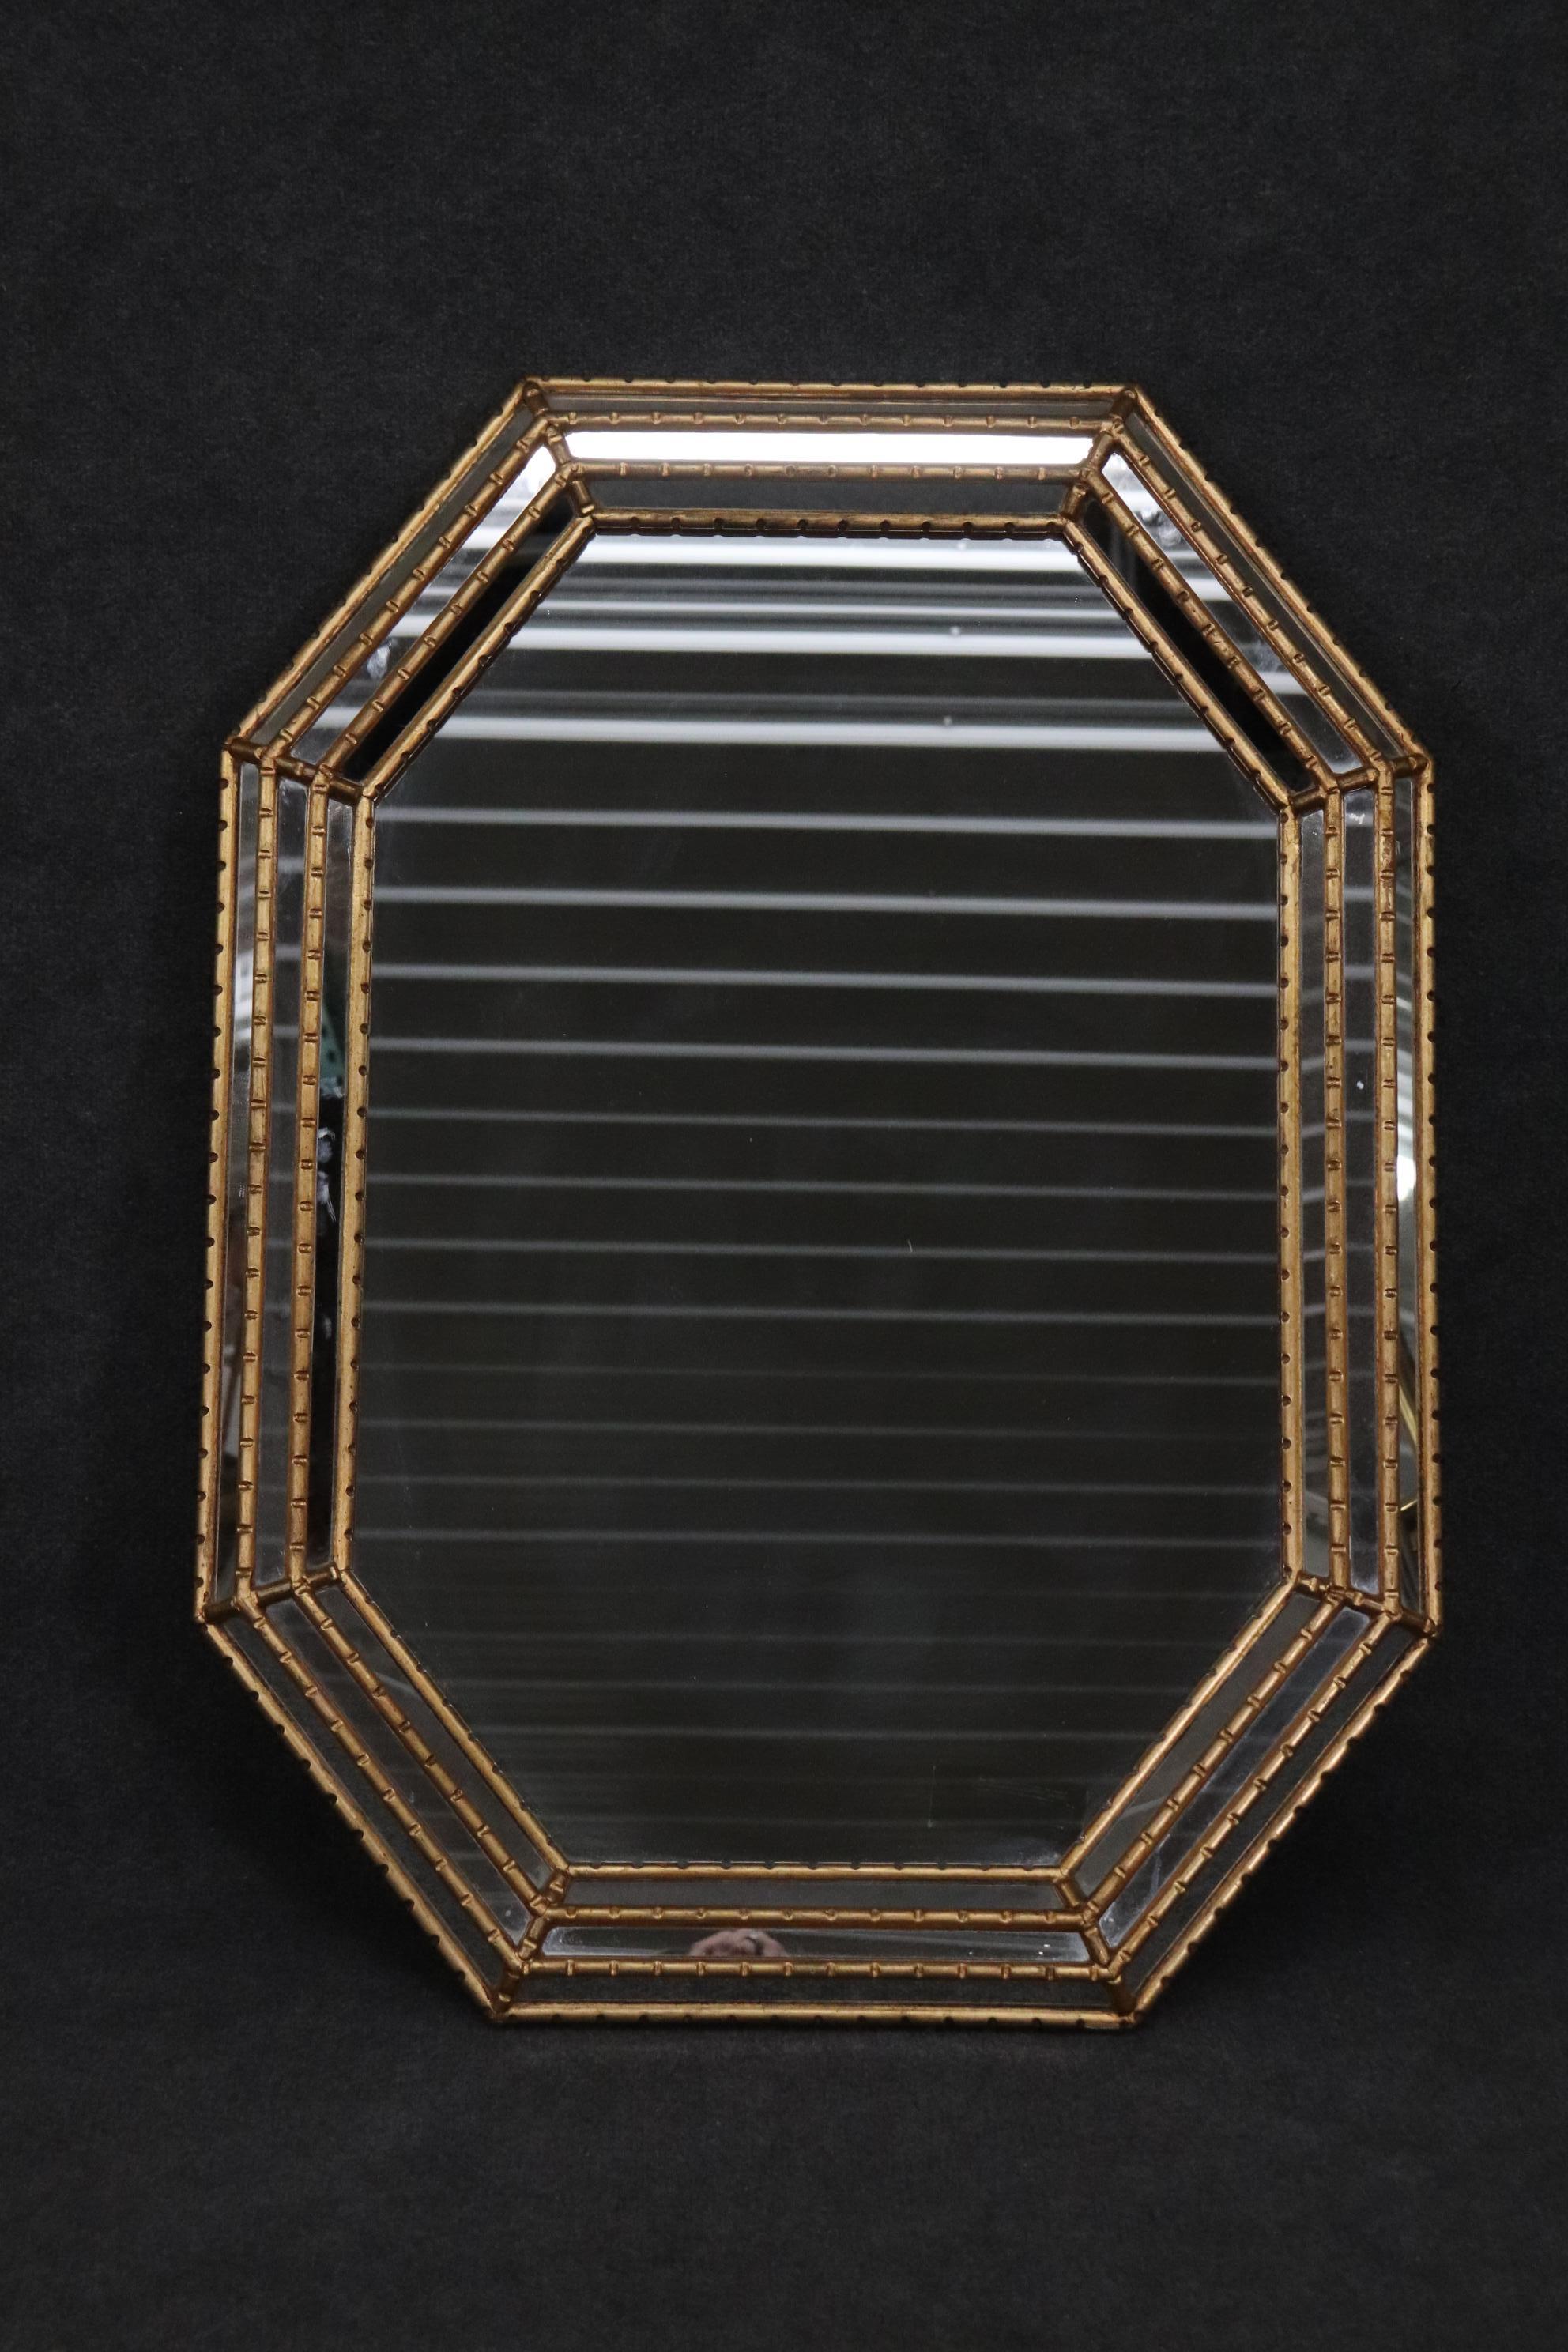 This is a gorgeous Italian-made mirror for decorative Arts. I have had a few in the past and this one is gorgeous. The mirror measures 31 wide x 43 tall x 2 inches deep and is in good condition.